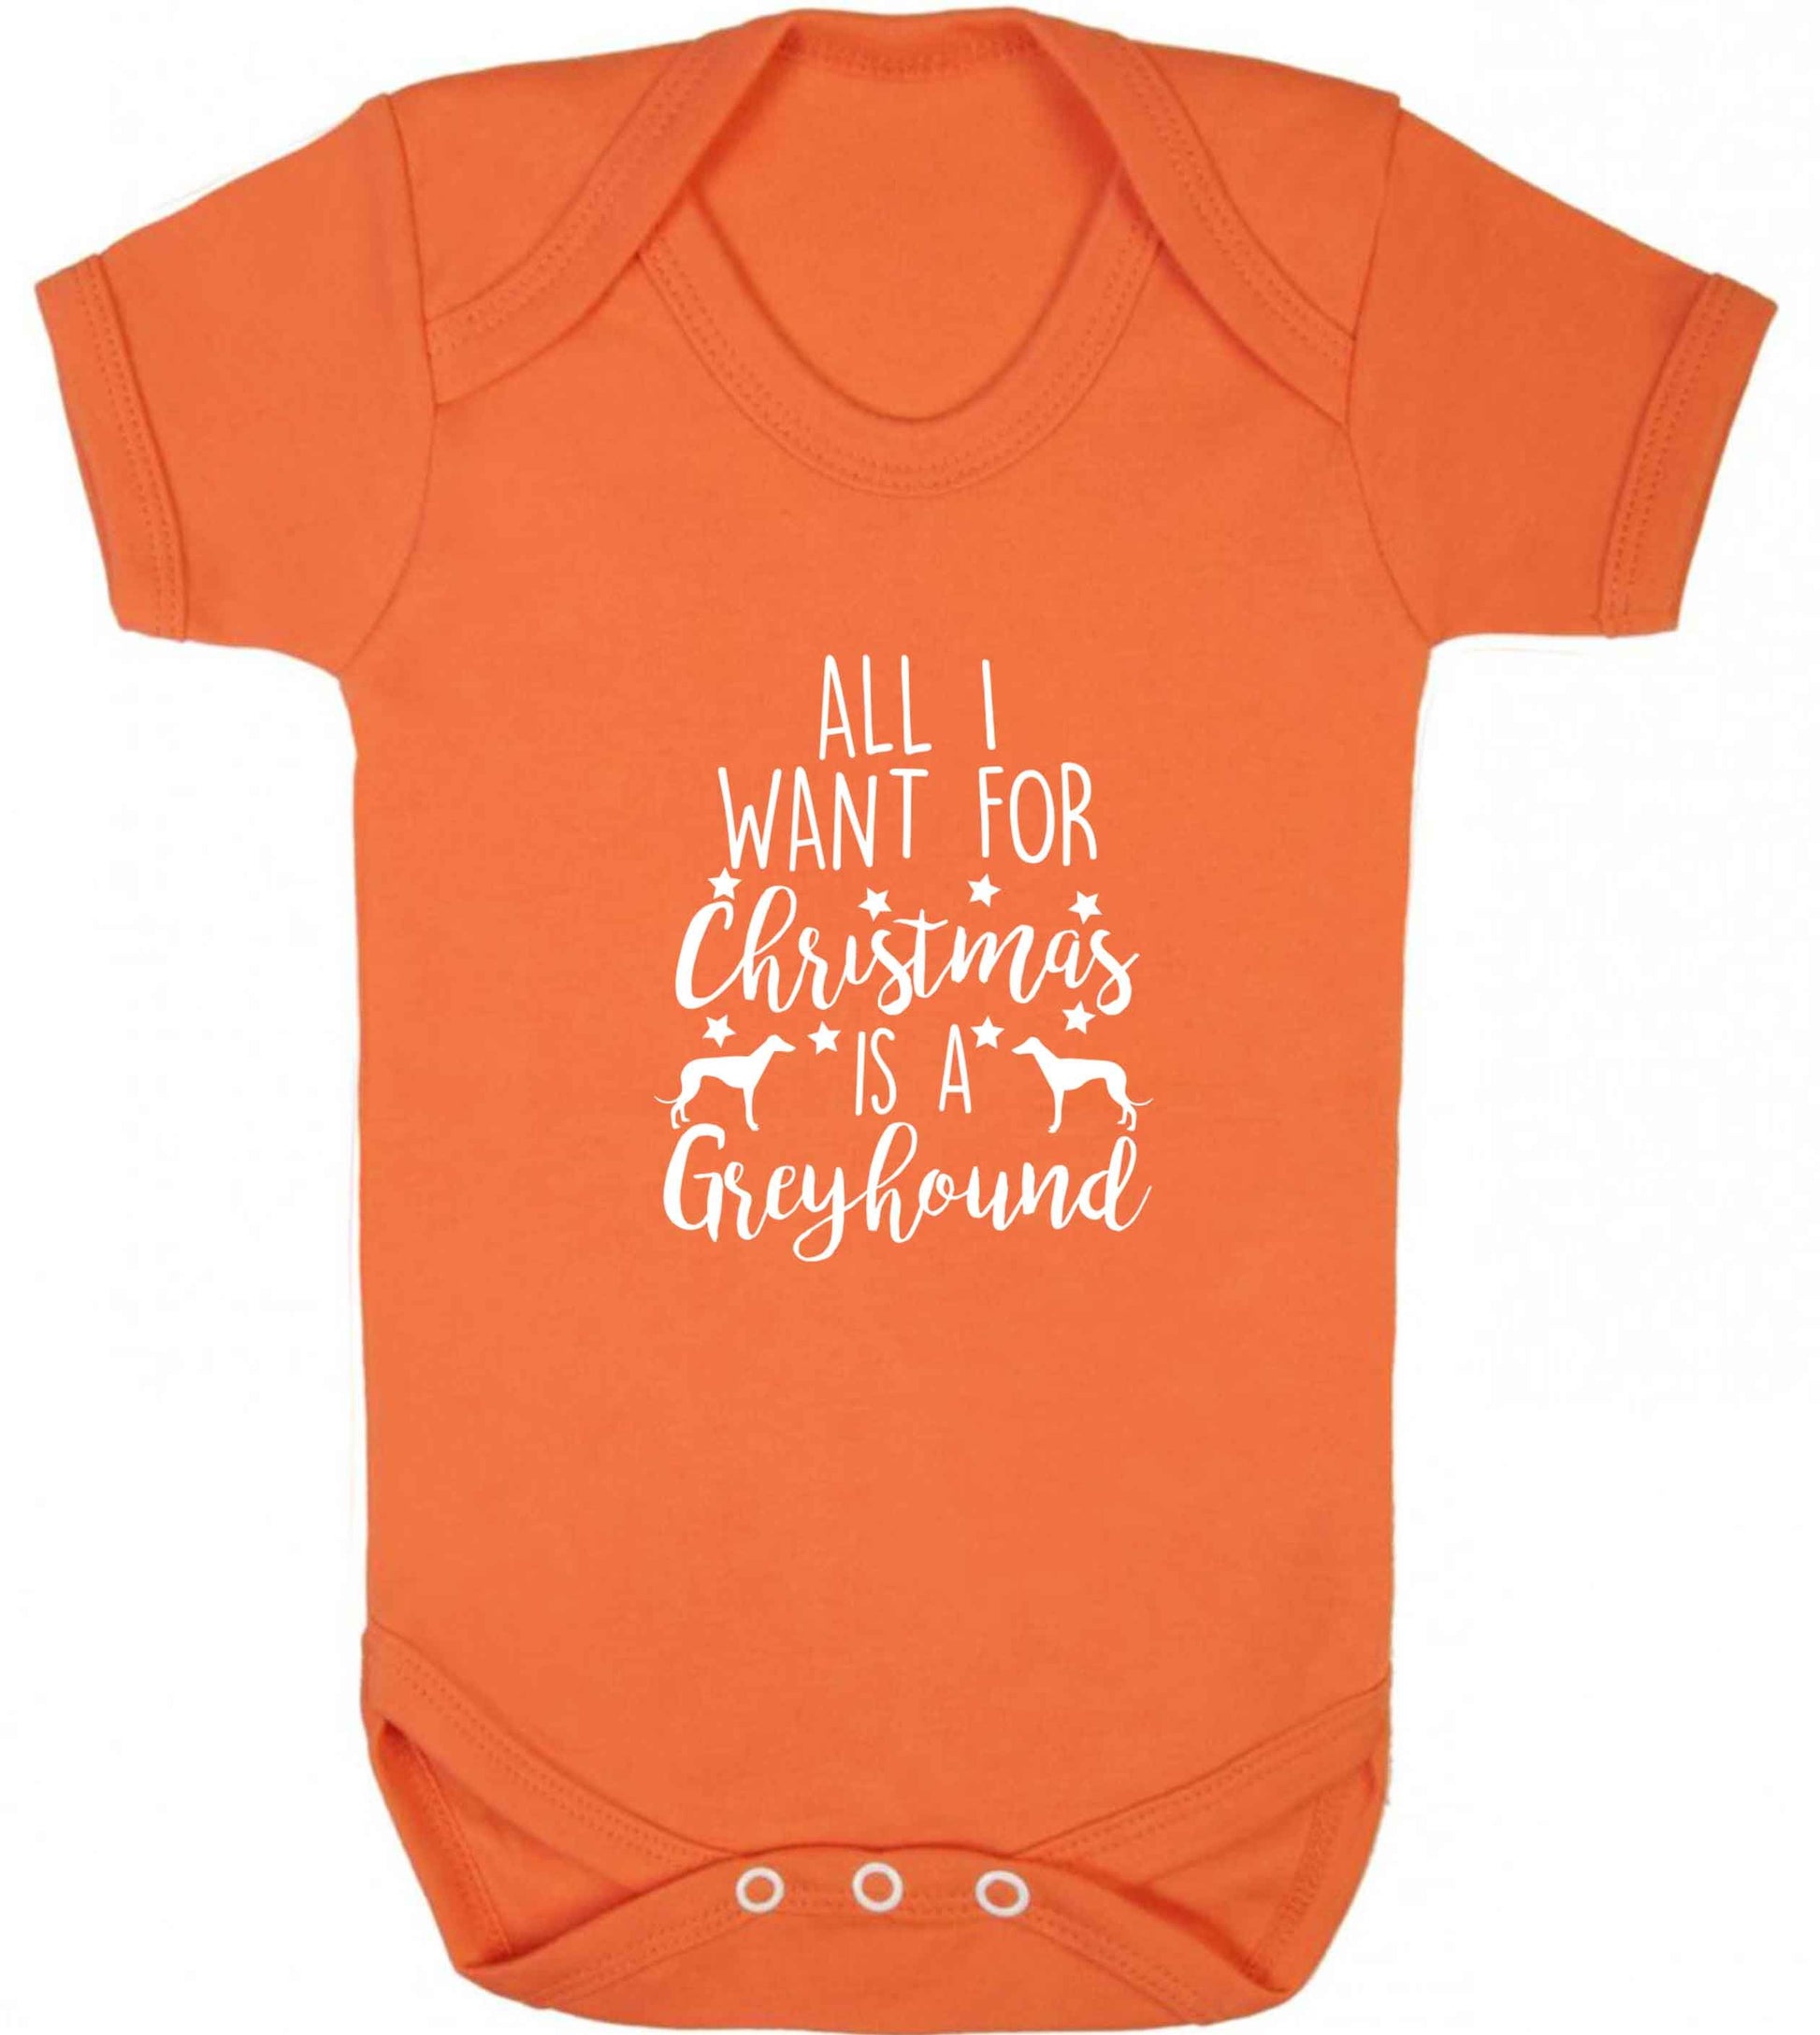 All I want for Christmas is a greyhound baby vest orange 18-24 months